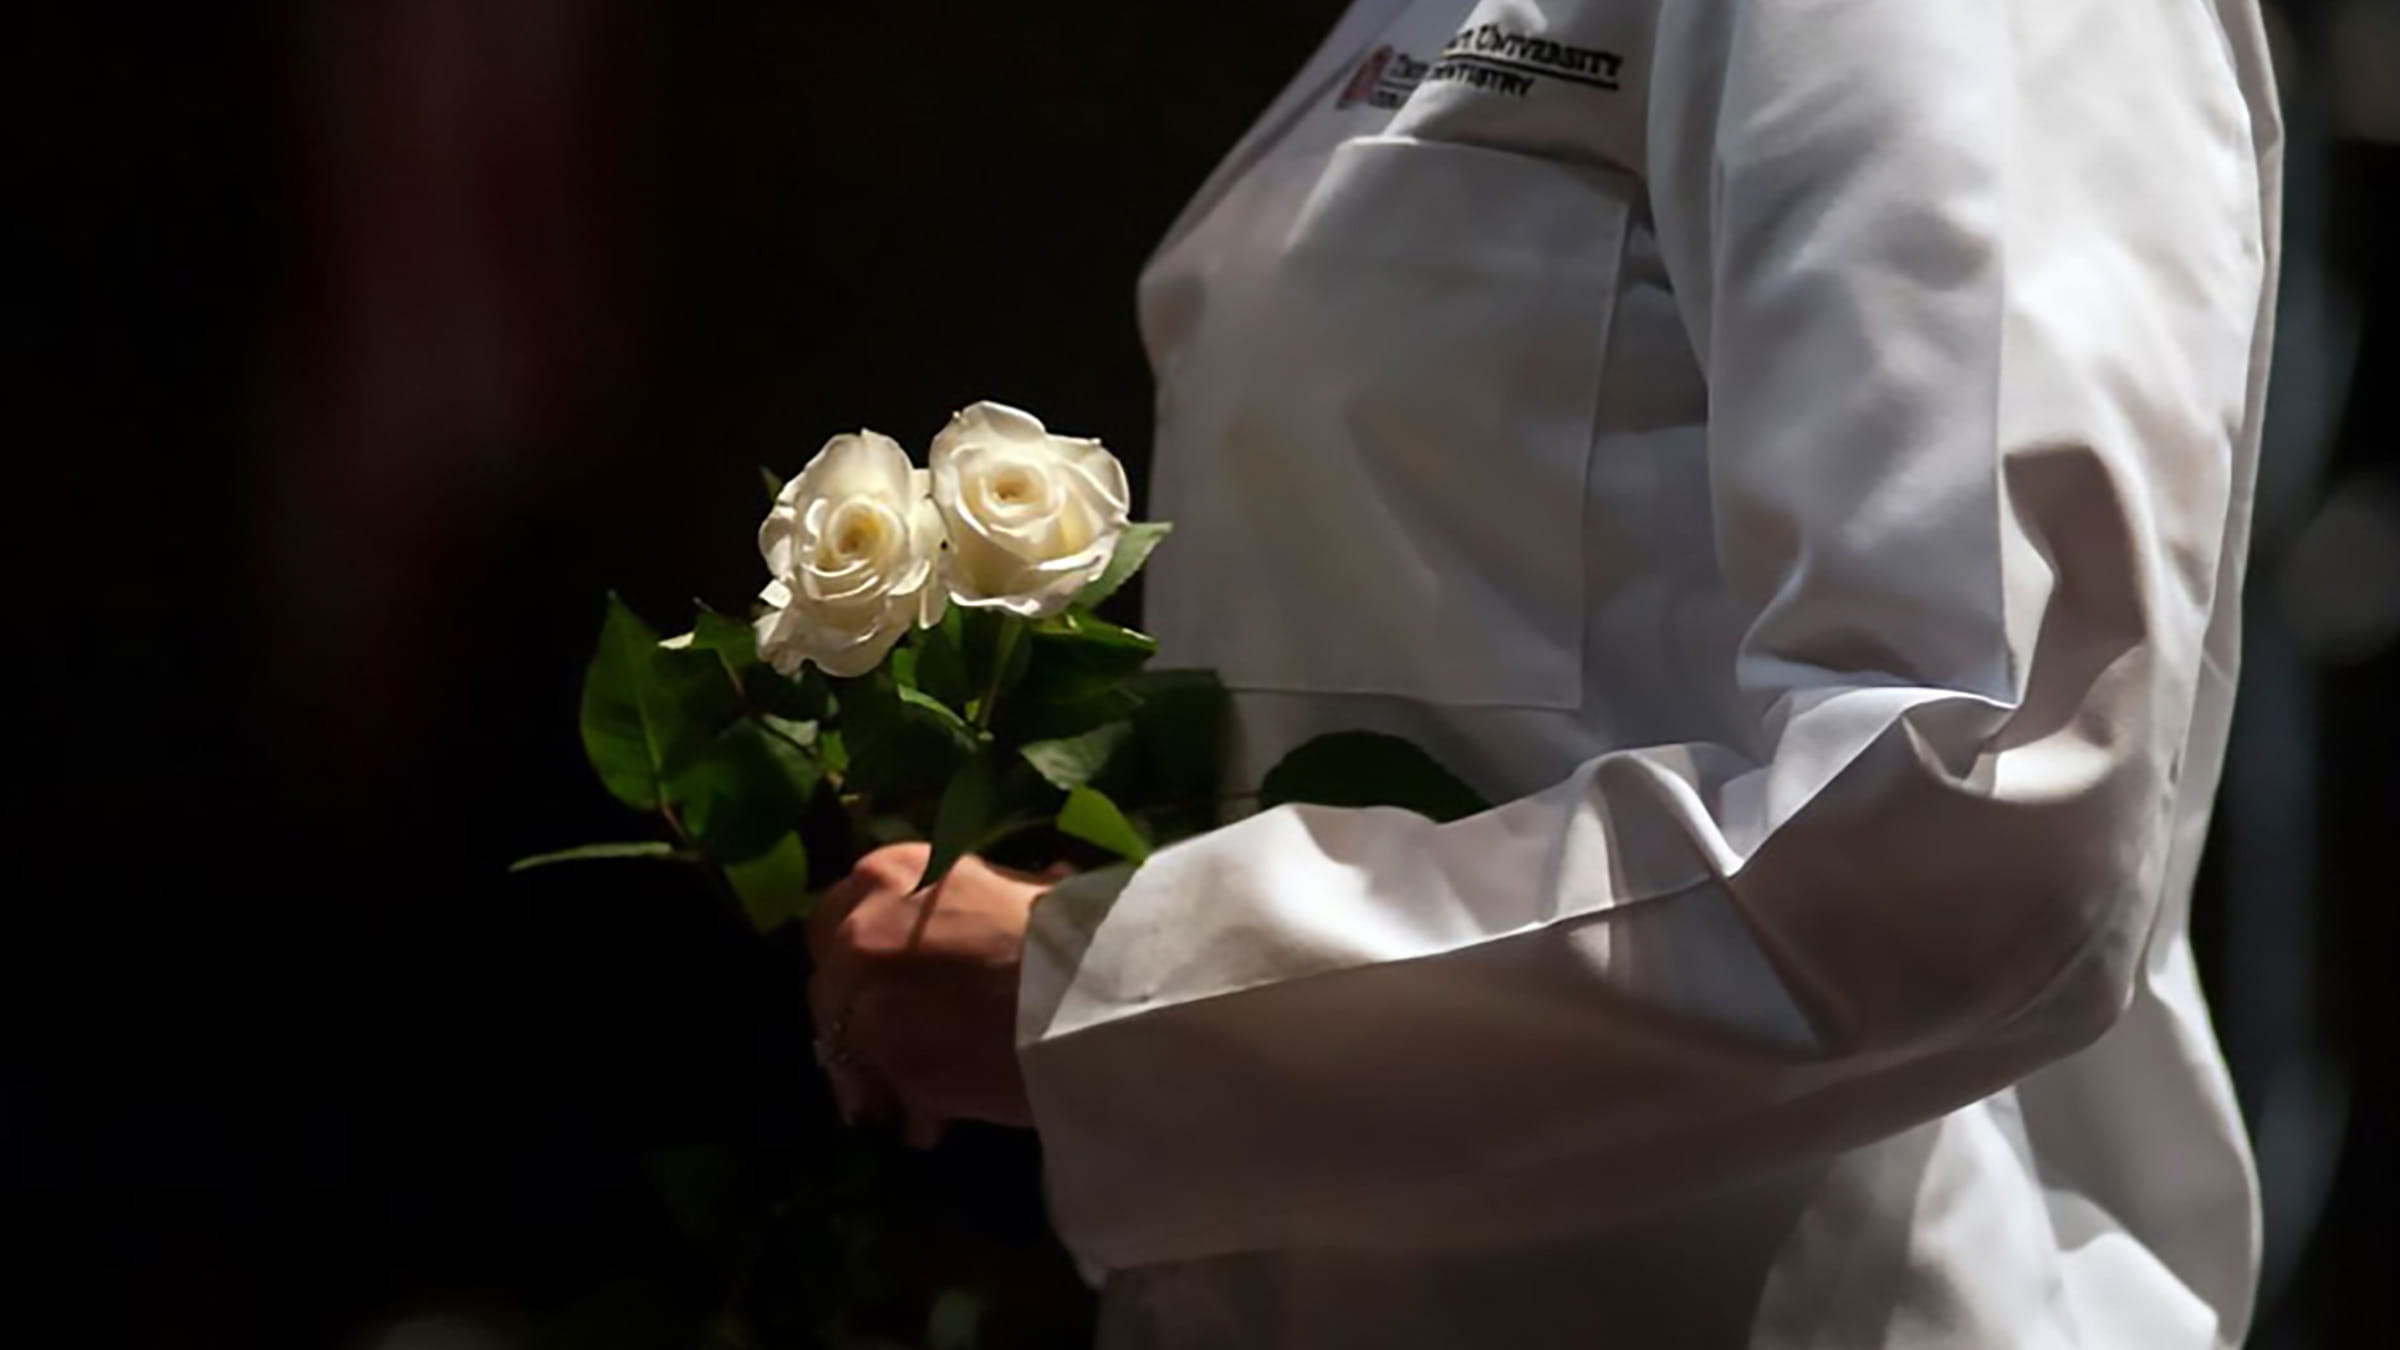 A medical student holding white roses at the Body Donation Program’s memorial service